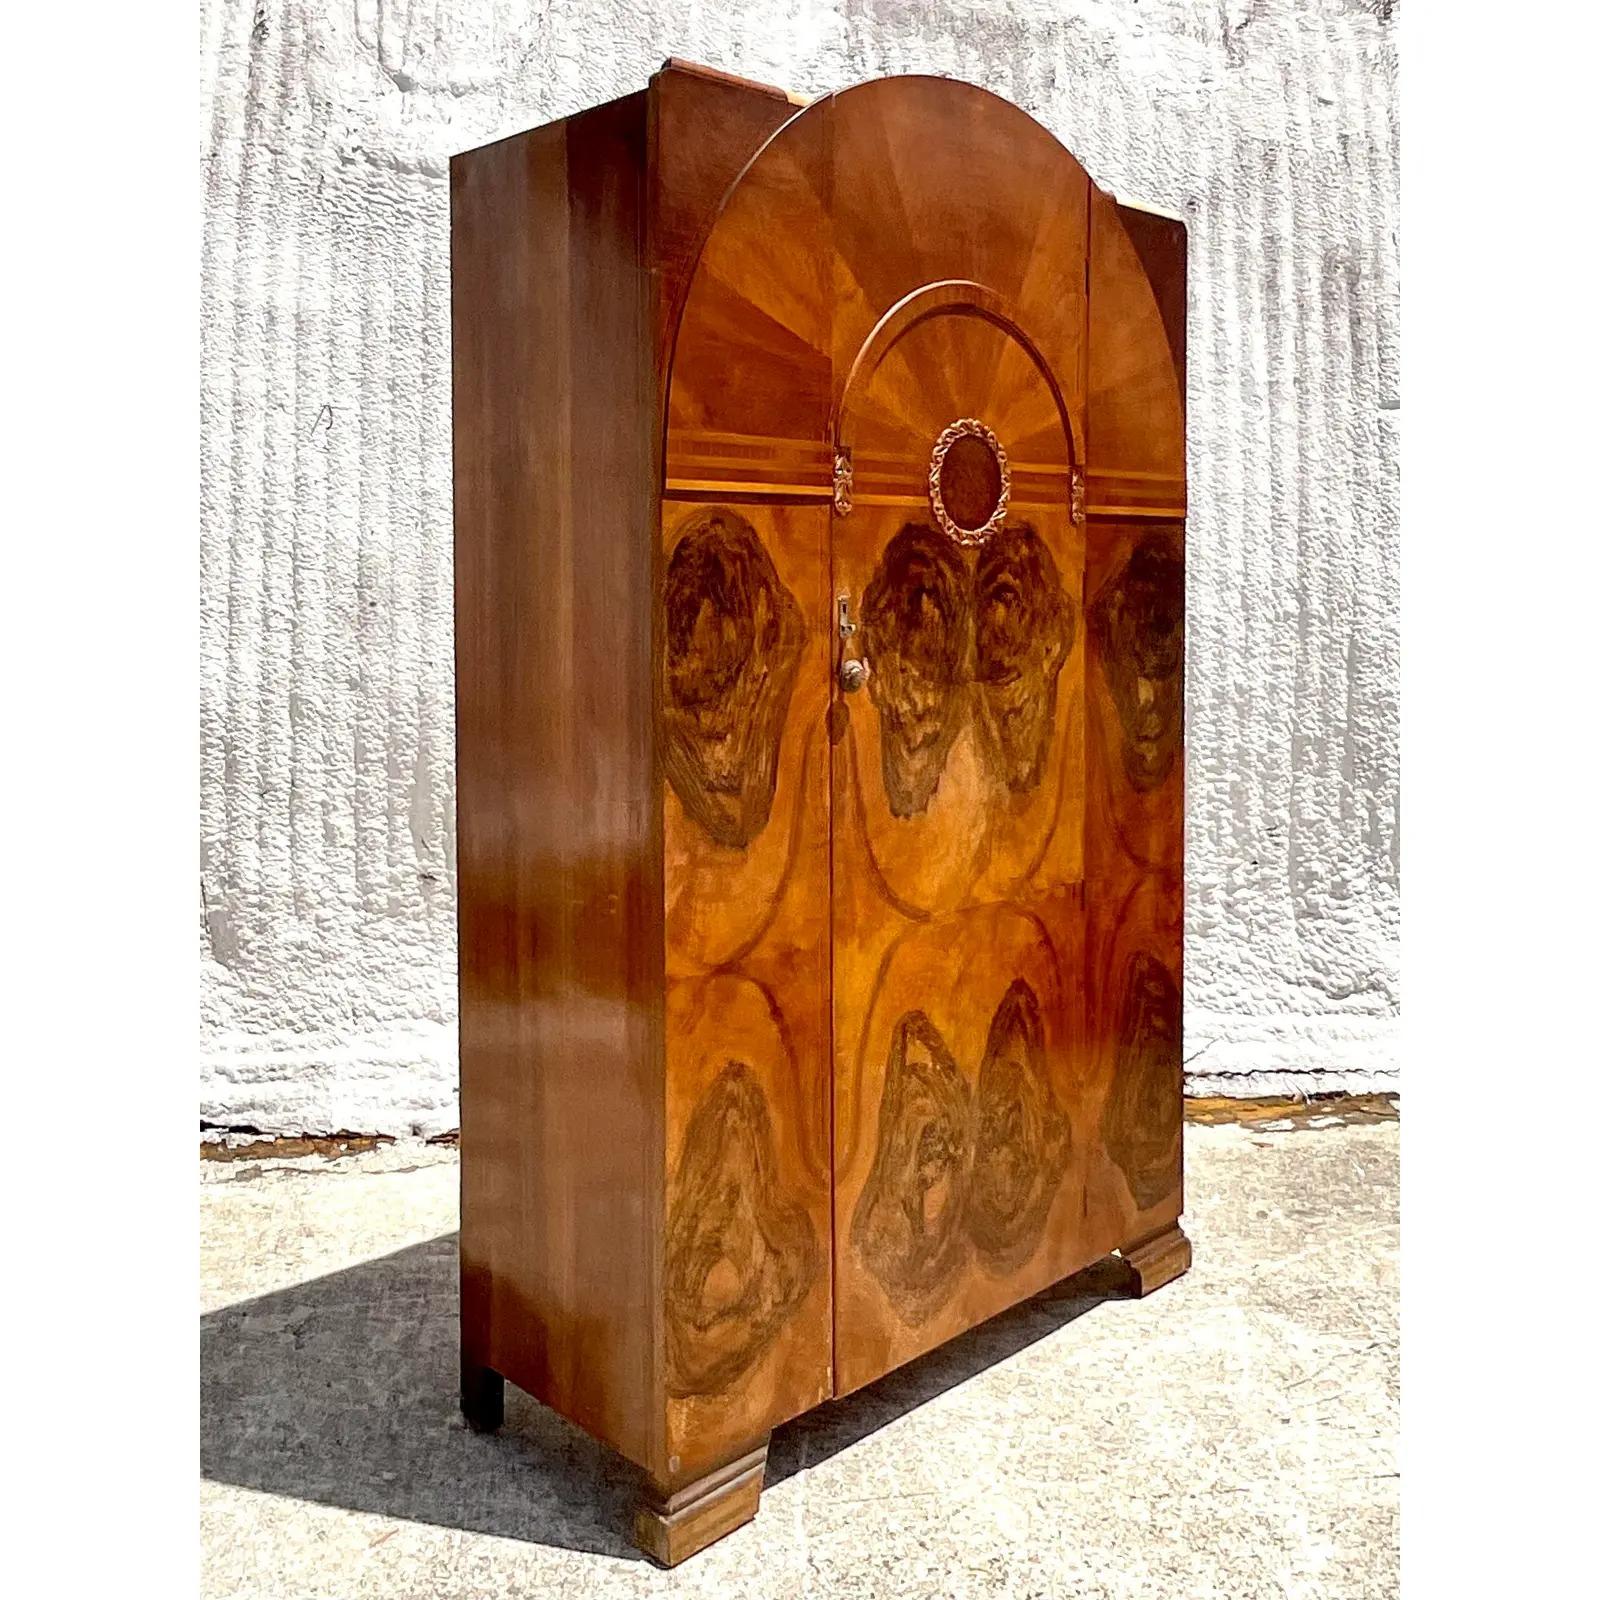 Incredible vintage Deco armoire. Beautiful wood grain detail. Two interior hang bars for your clothing. Easily reconfigured however you like. Acquired from a Palm Beach estate.